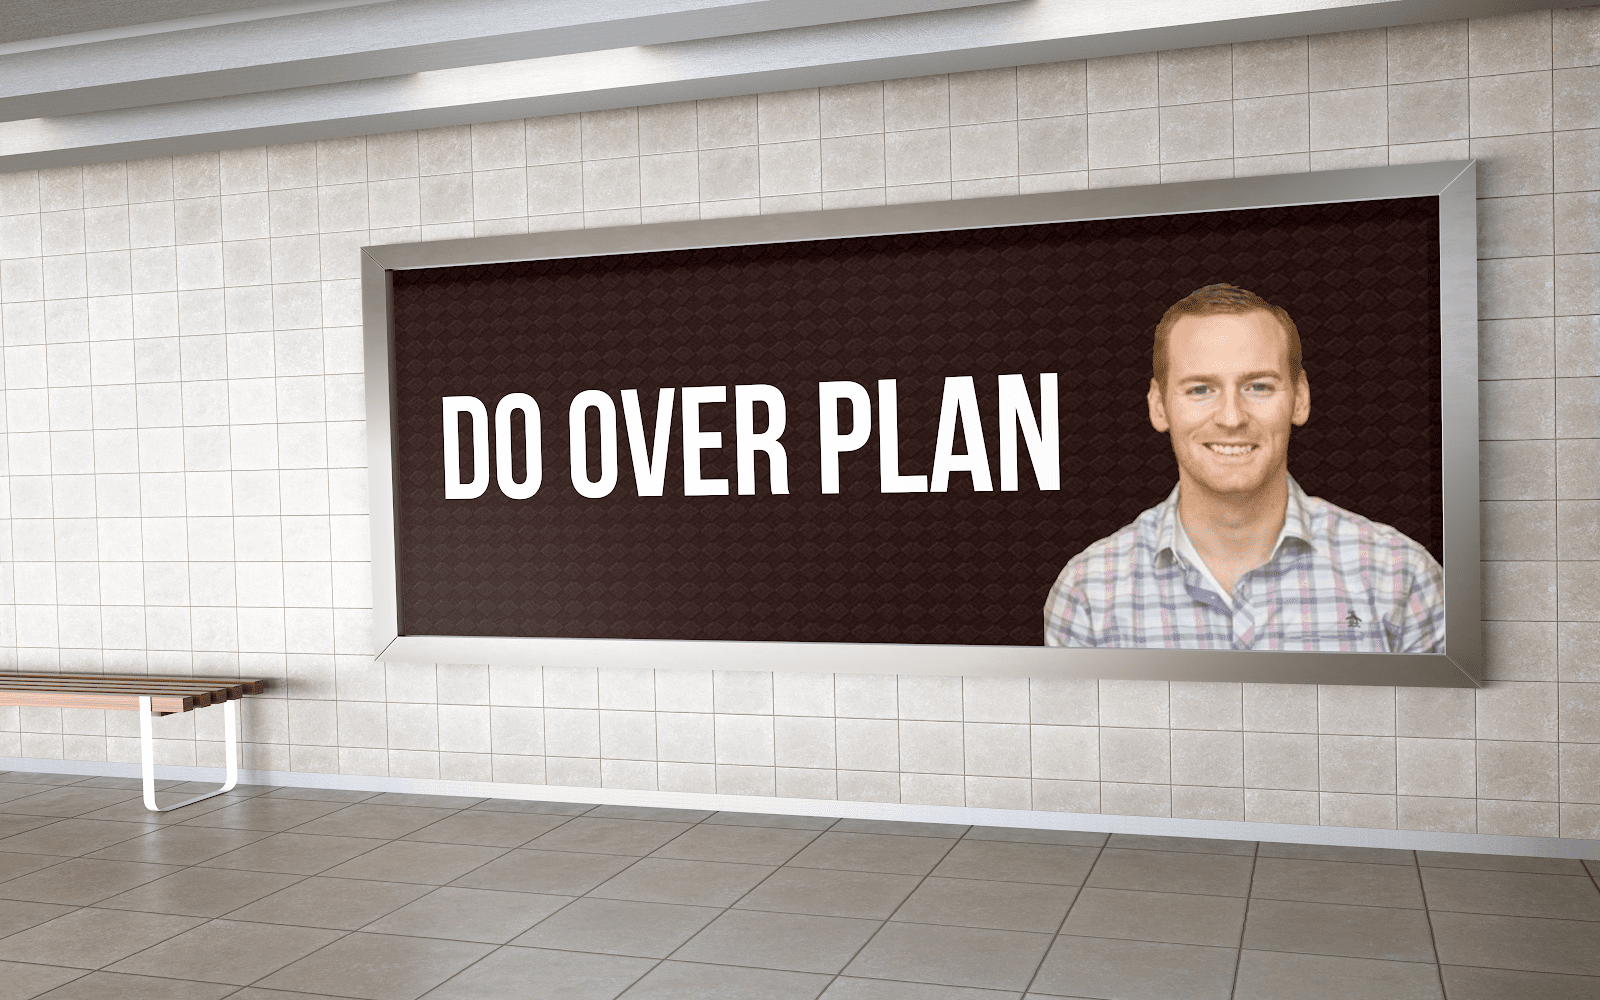 A billboard with an image of Eric and the quote "Do over plan."